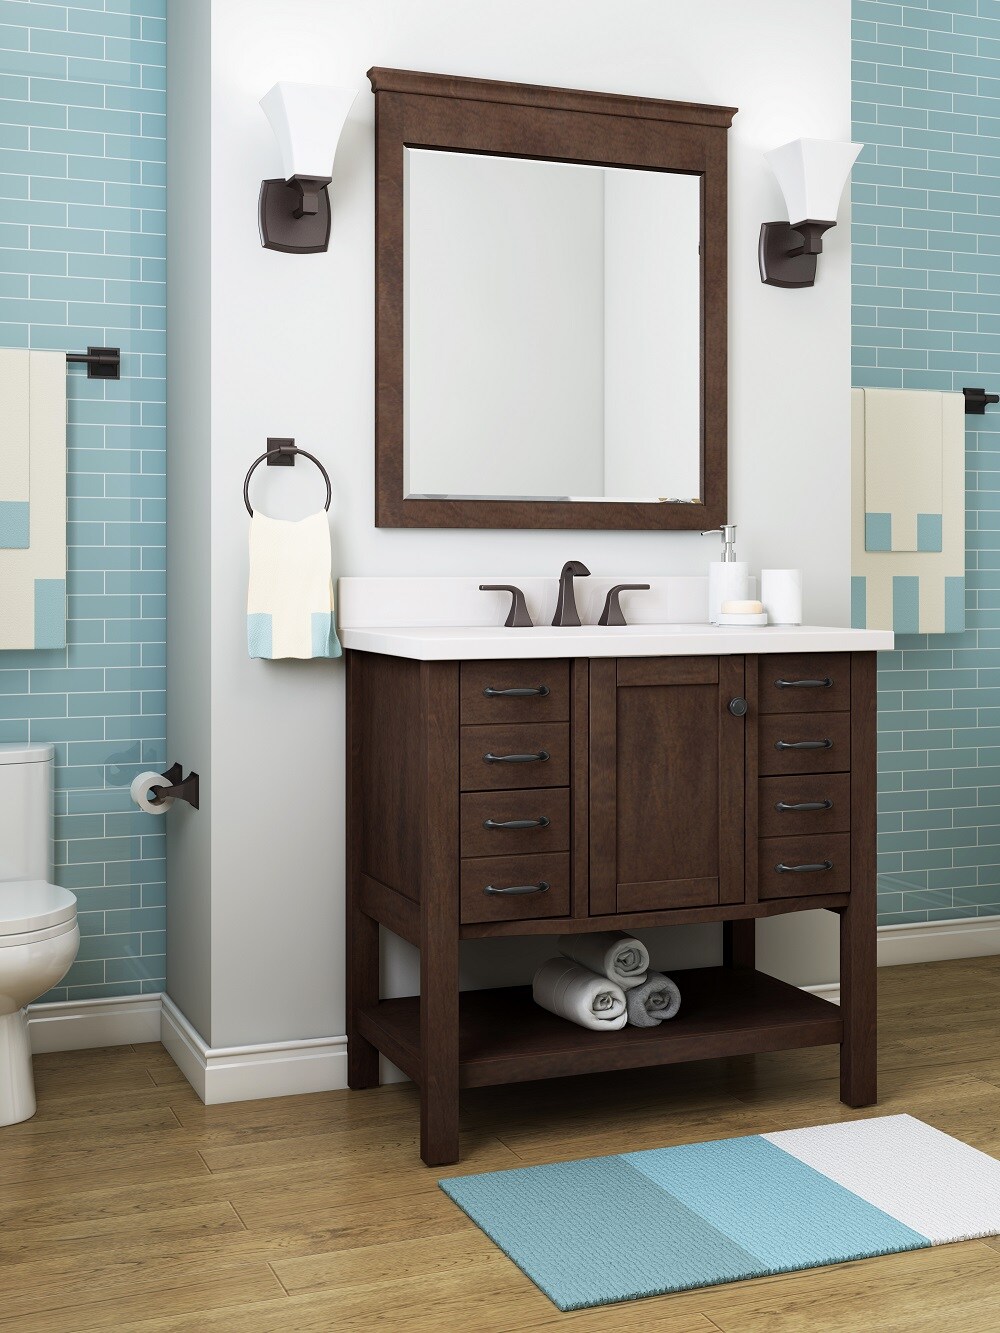 allen + roth Kingscote 36-in Espresso Vanities Stone Top Tops Engineered with in Vanity at Sink White Bathroom with the Single Bathroom Undermount department